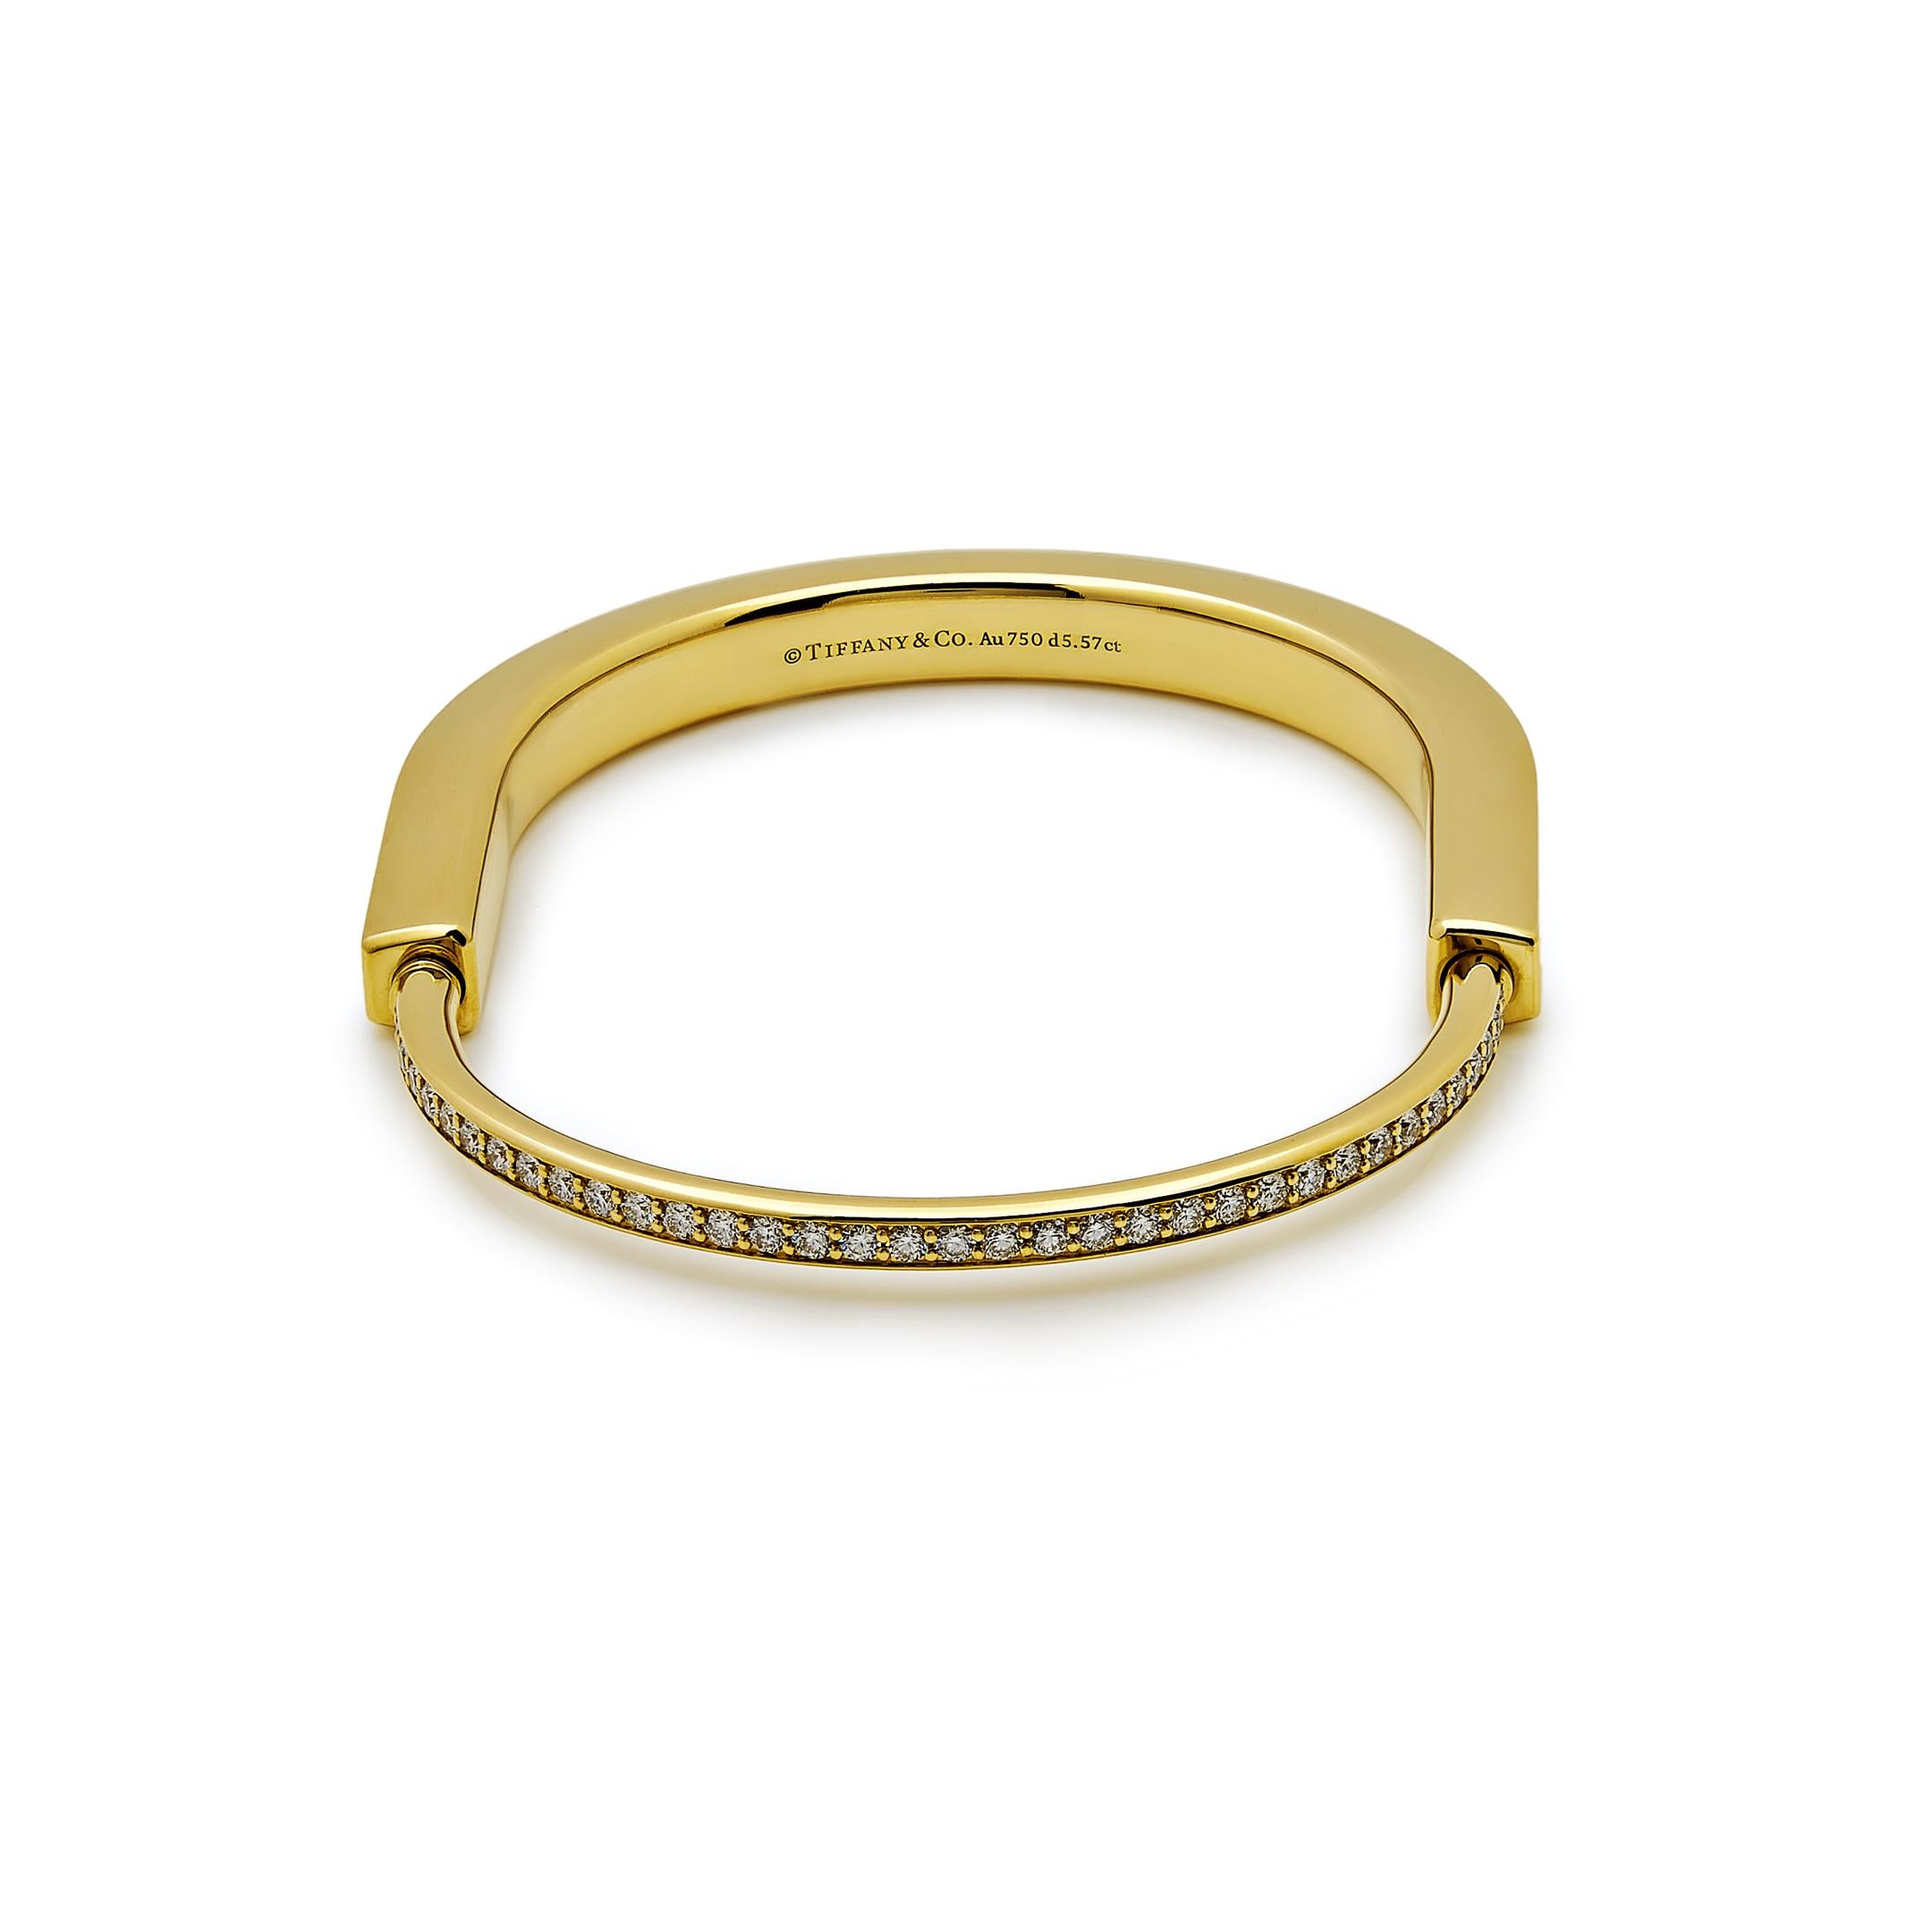 Round Cut Tiffany & Co. Lock Bangle in Yellow Gold with Full Pavé Diamonds 70158264 For Sale